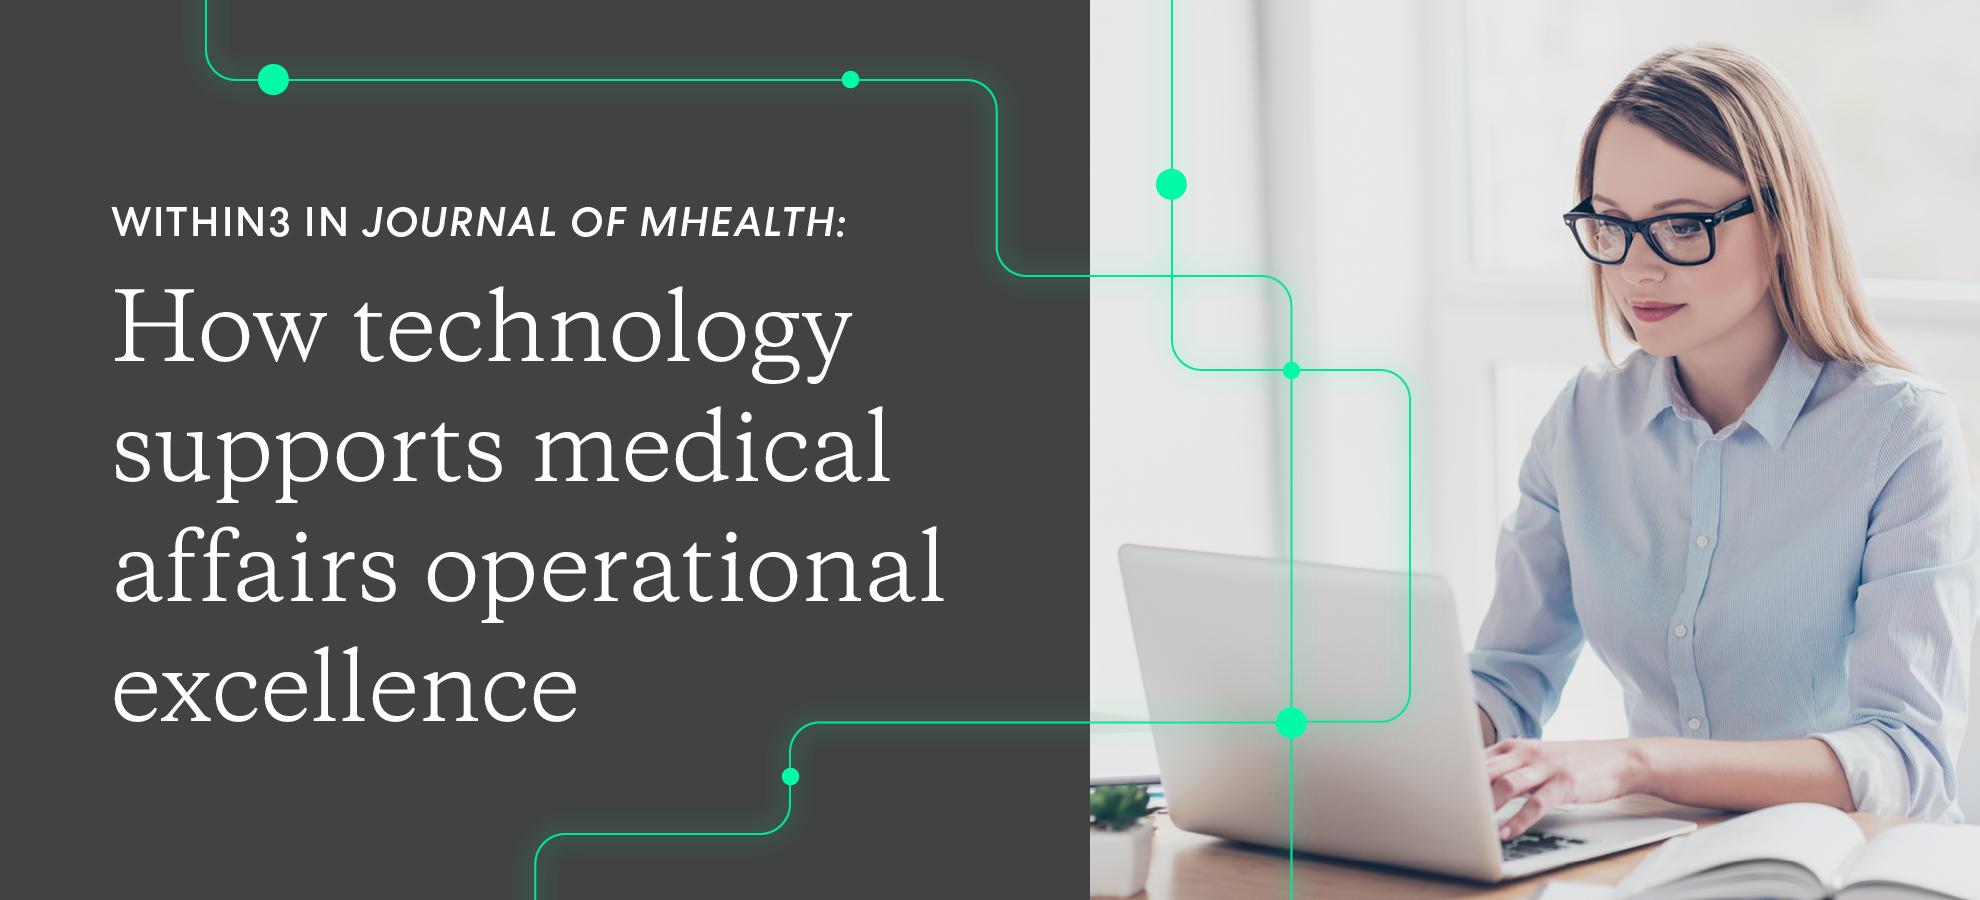 Within3 in Journal of mHealth: operational excellence in medical affairs